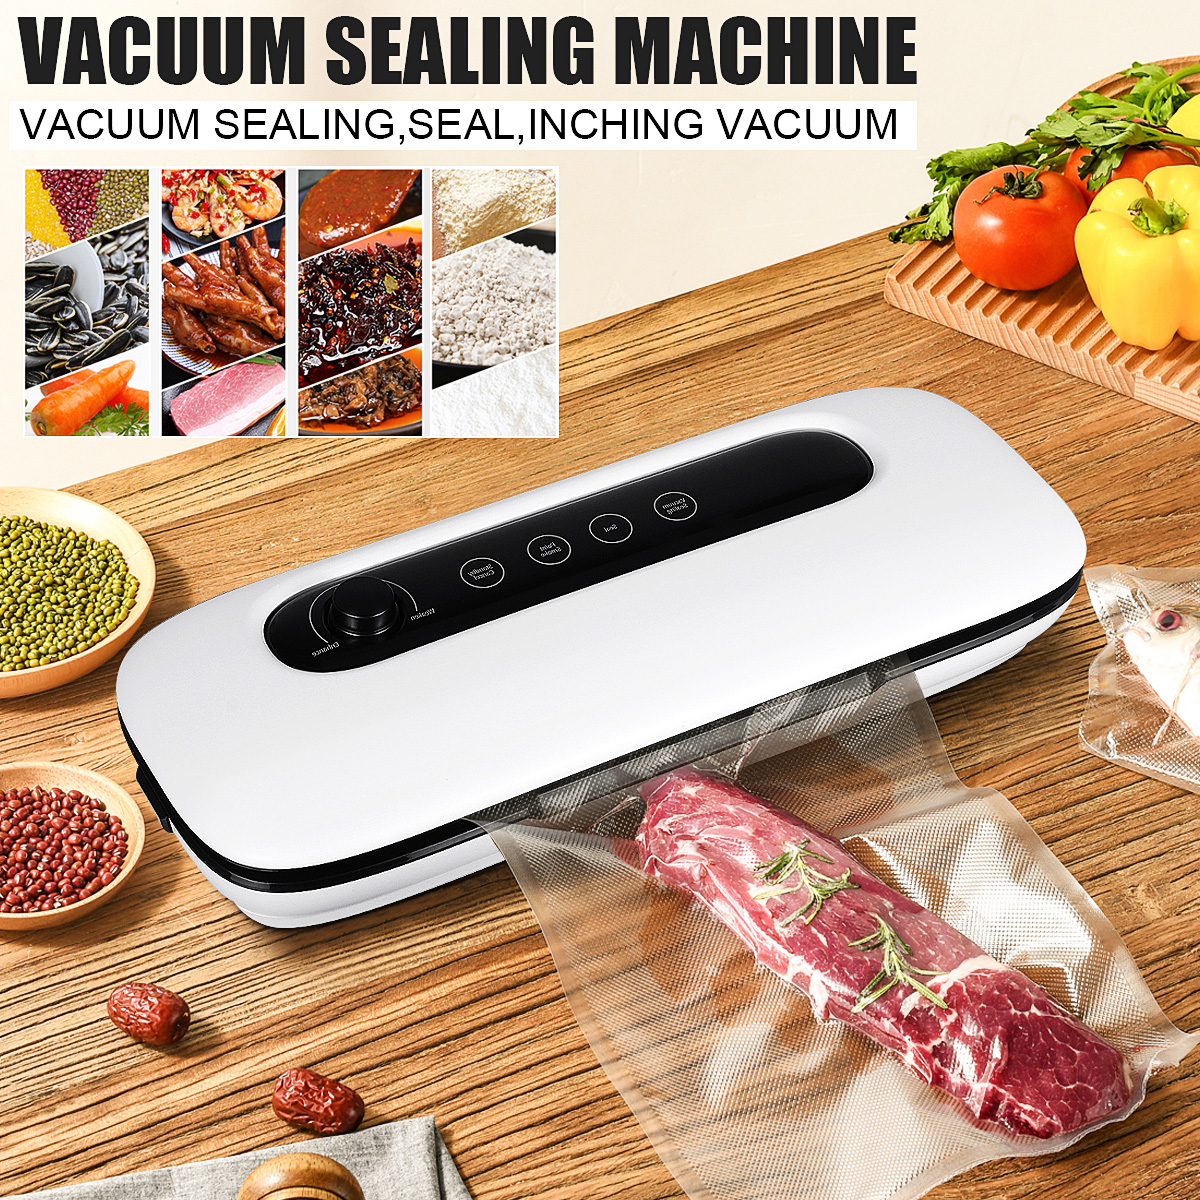 Vacuum-Sealer-Machine-Full-Automatic-Food-Sealer-Air-Sealing-System-for-Food-Storage-3-Functions-Ove-1928369-1